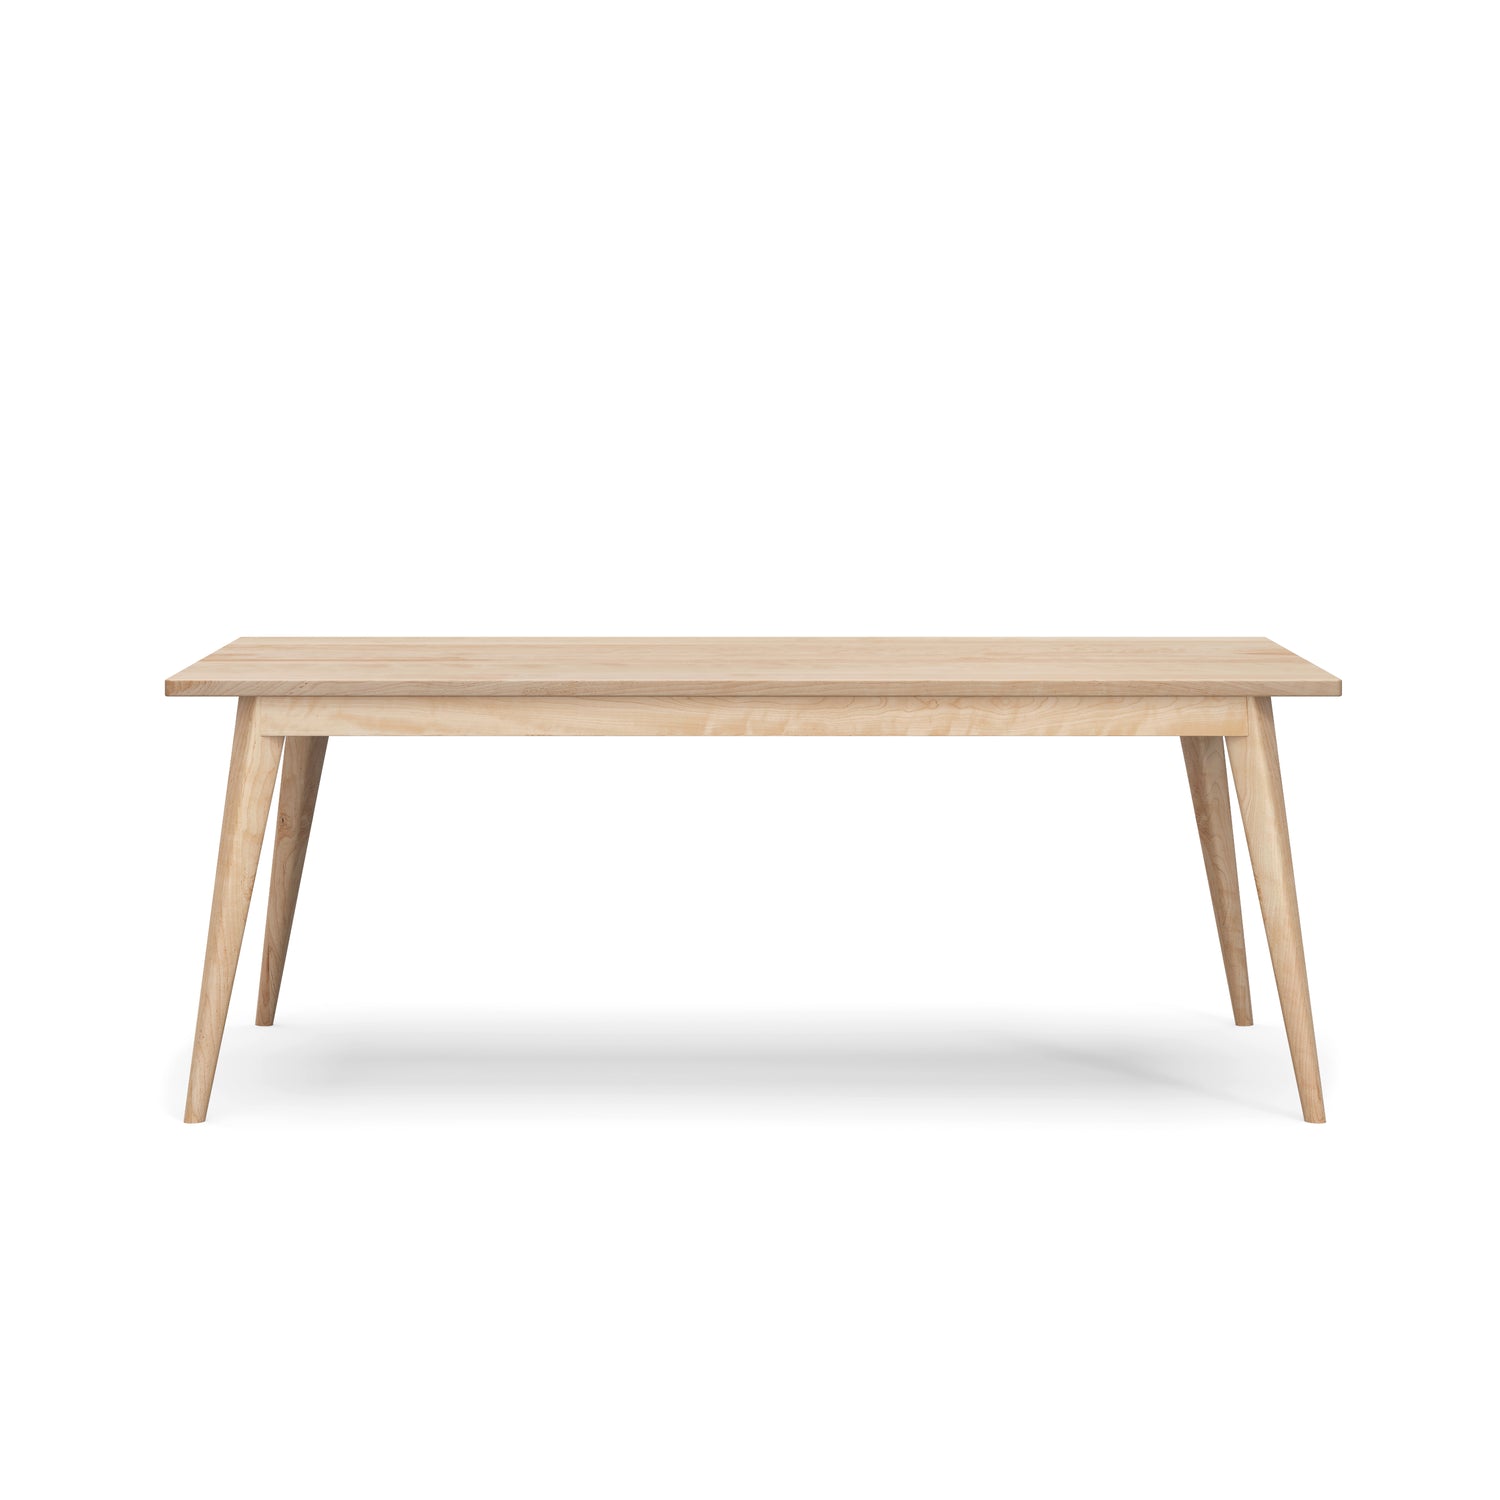 Oslo cherry wood table - 78 x36 in. - 2849